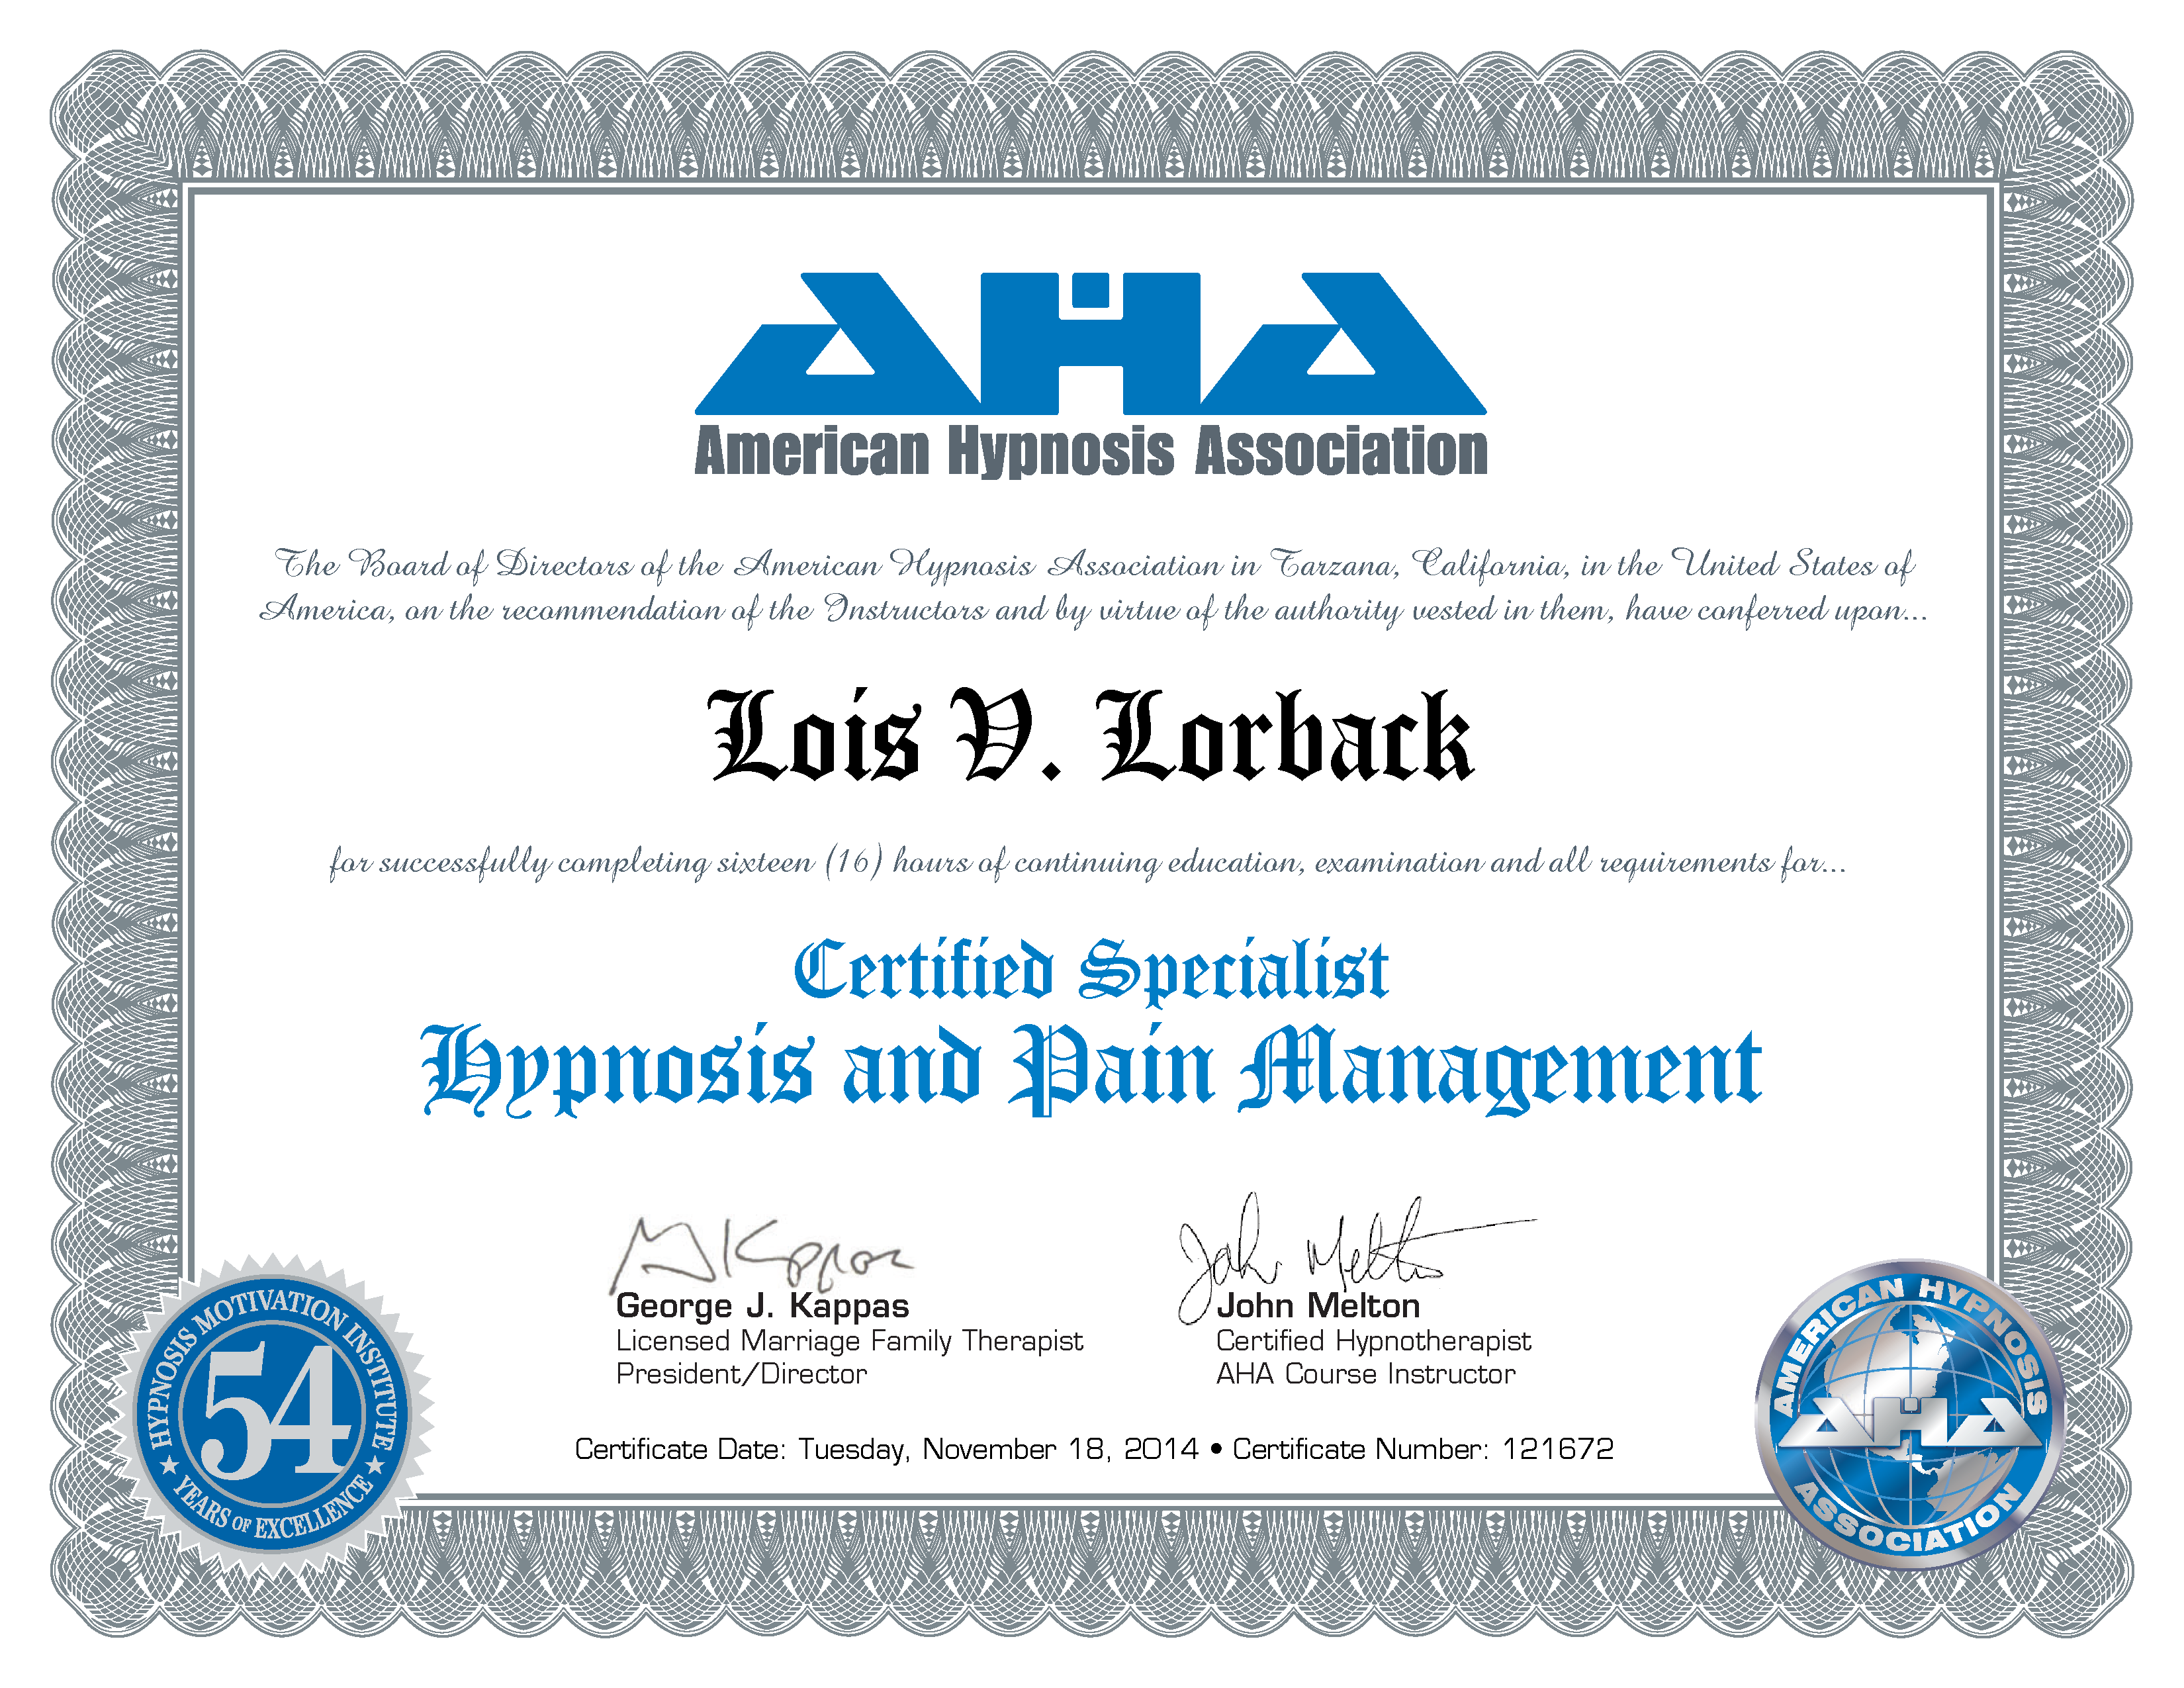 Lois Lorback Hypnosis and Pain Management Certificate